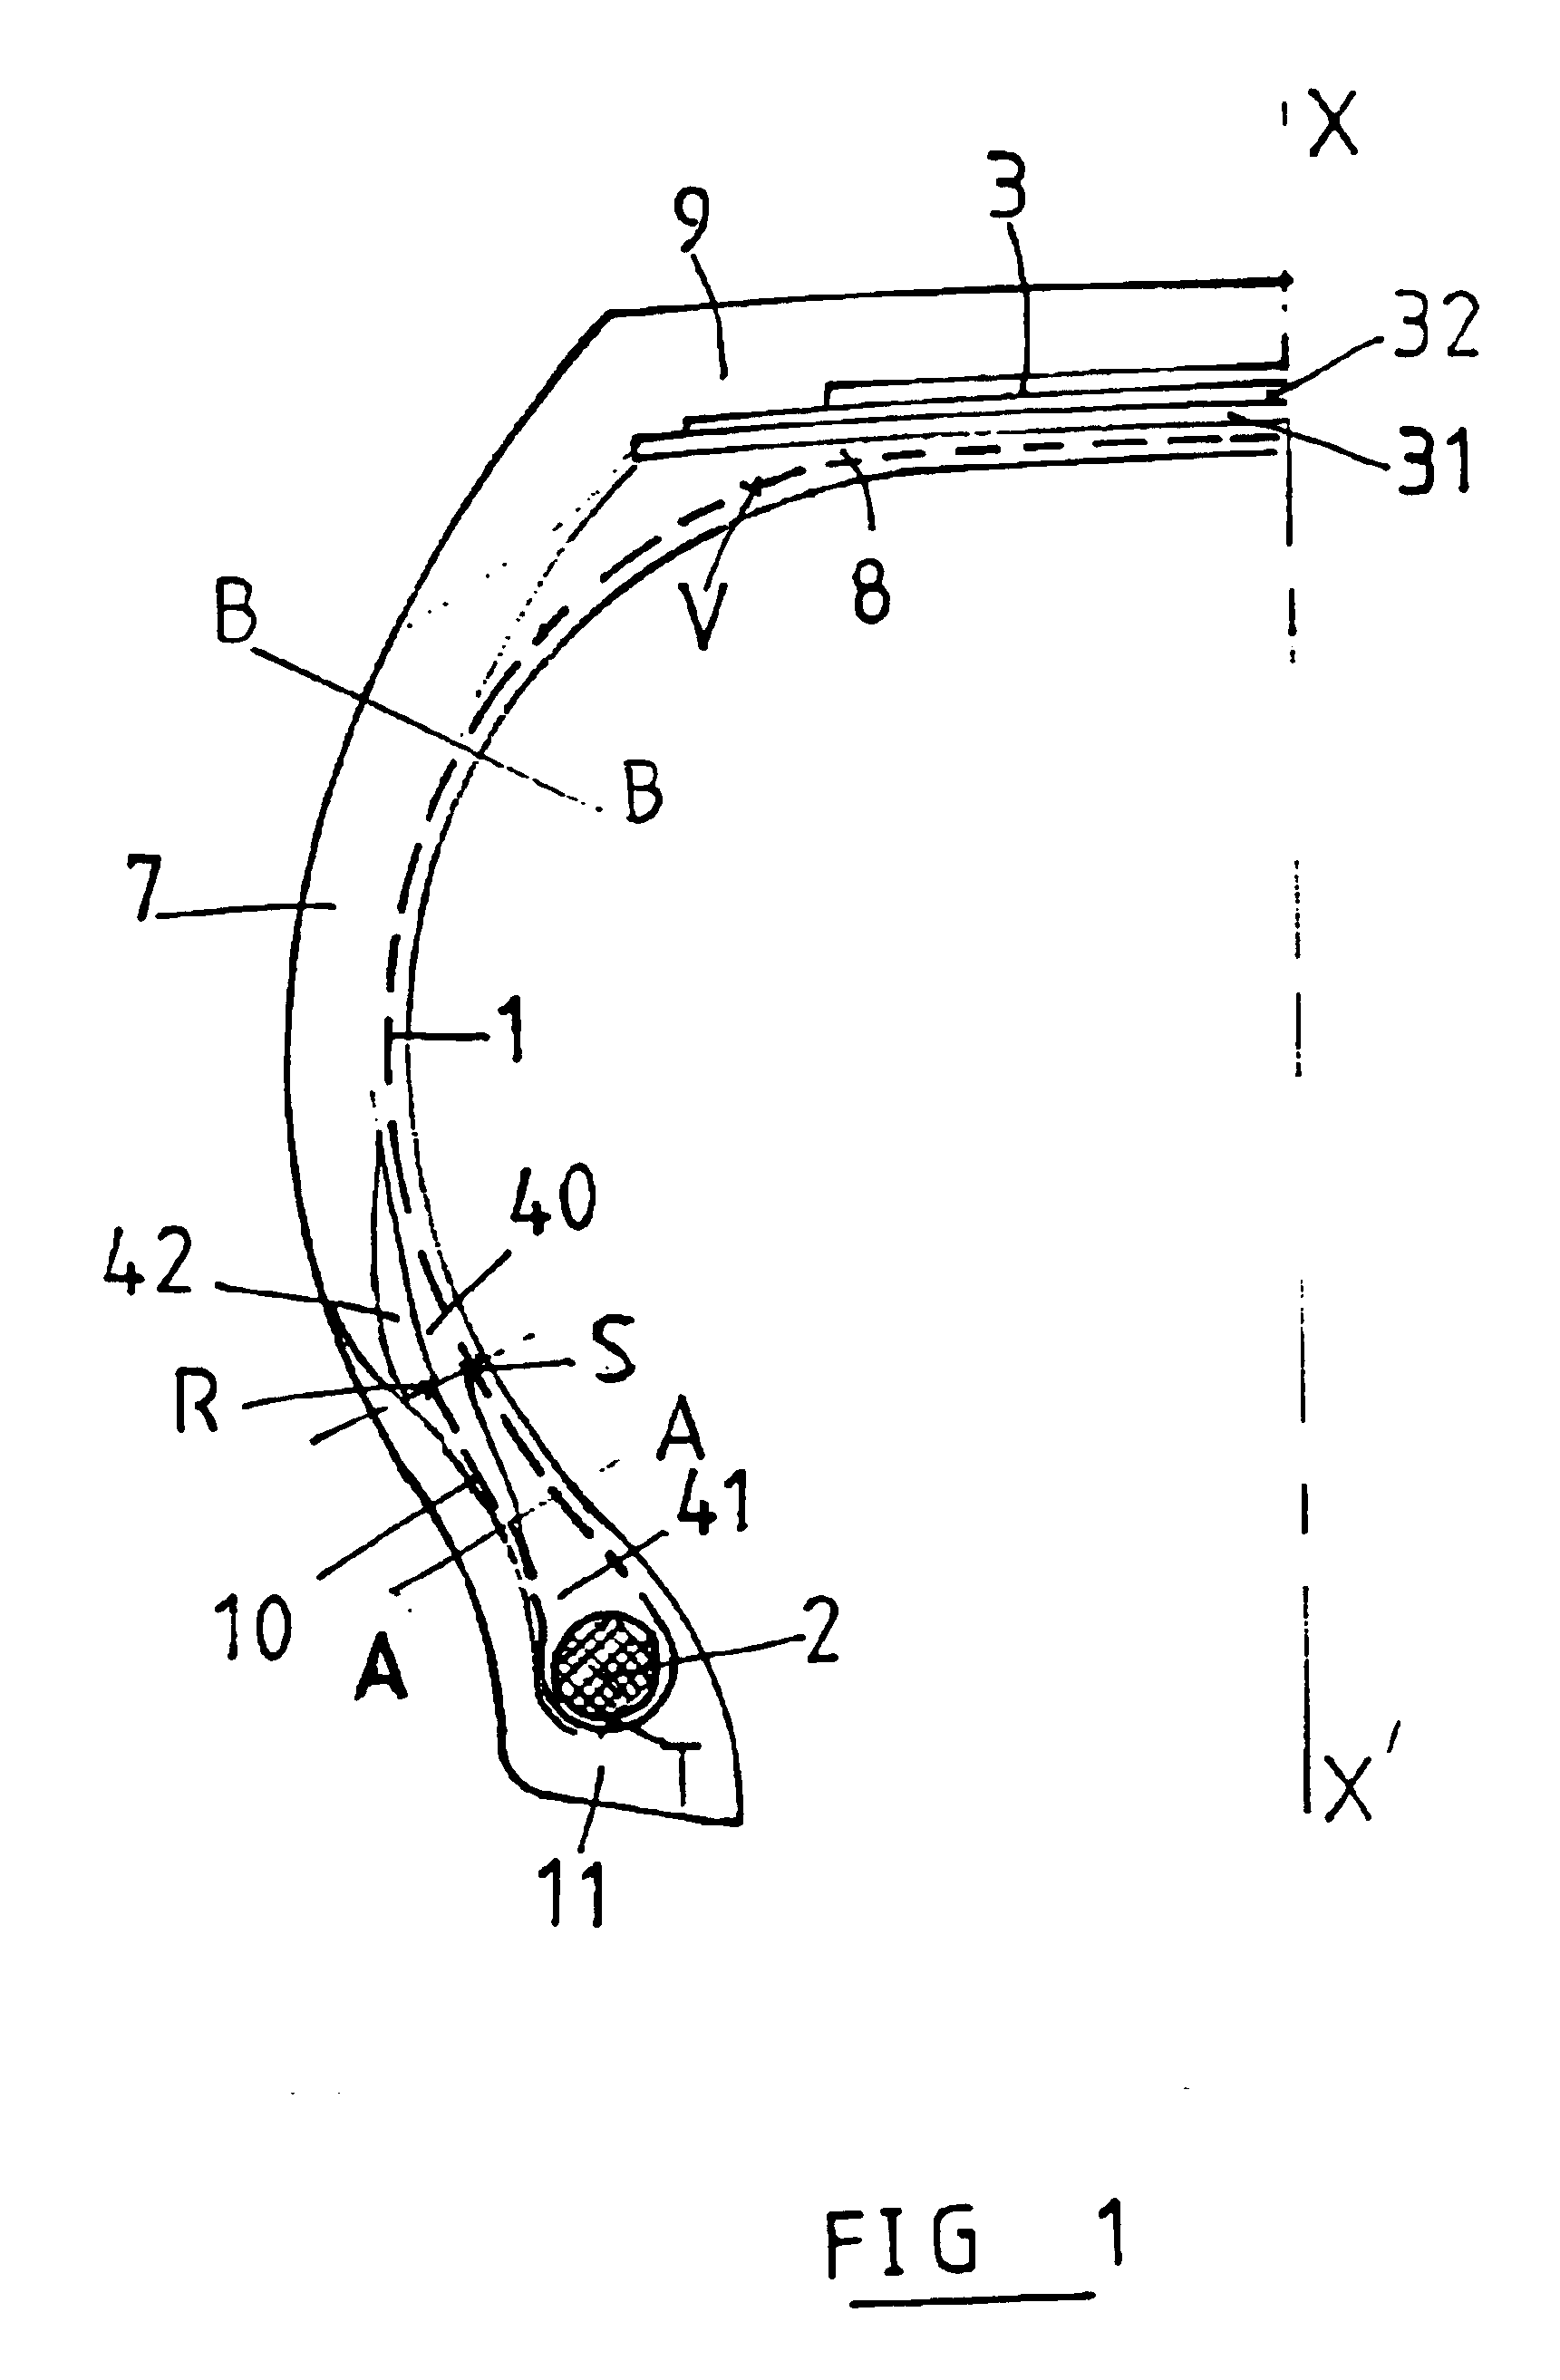 Tire with specified reinforcing ply